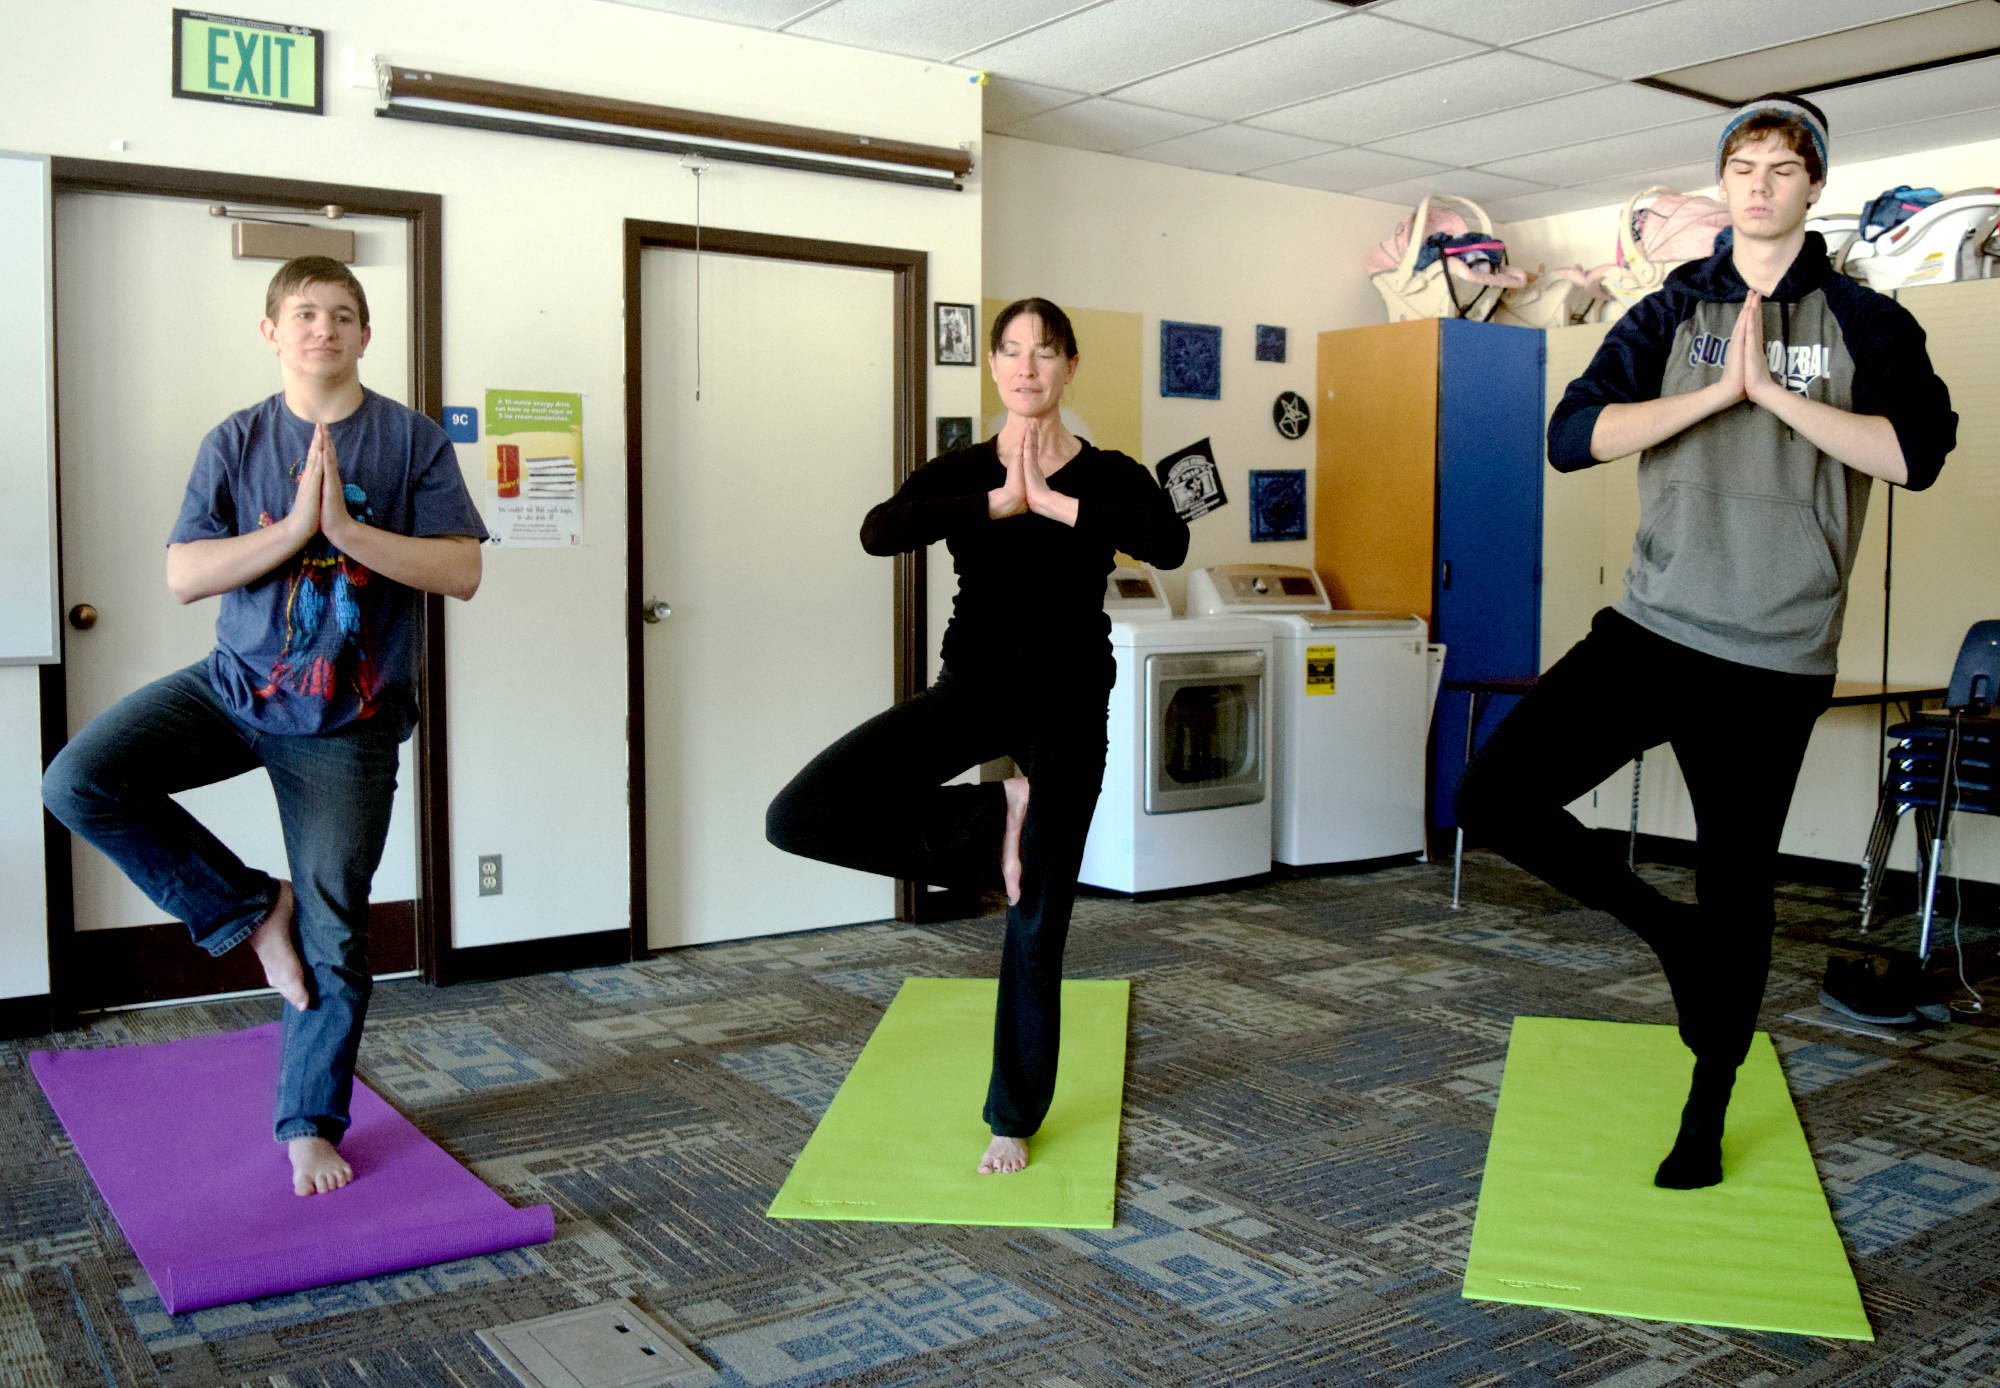 Lisa Wells, center, leads a group of students into tree pose during a yoga class held at Soldotna High School on Friday. (Photo by Kat Sorensen/Peninsula Clarion)